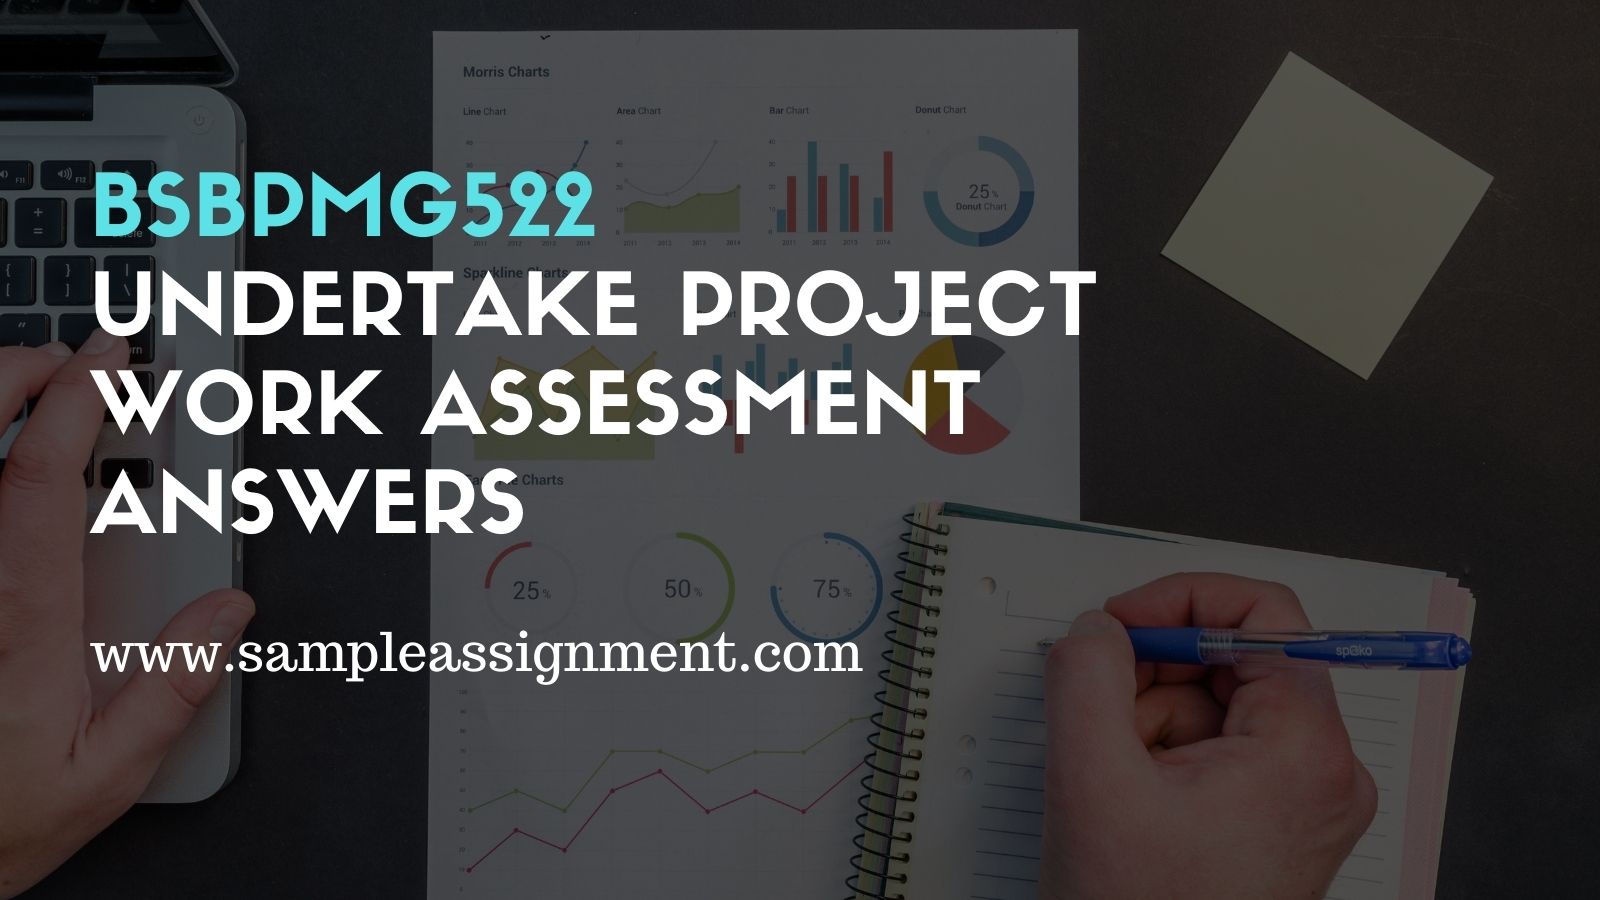 BSBPMG522 Assessment Answers